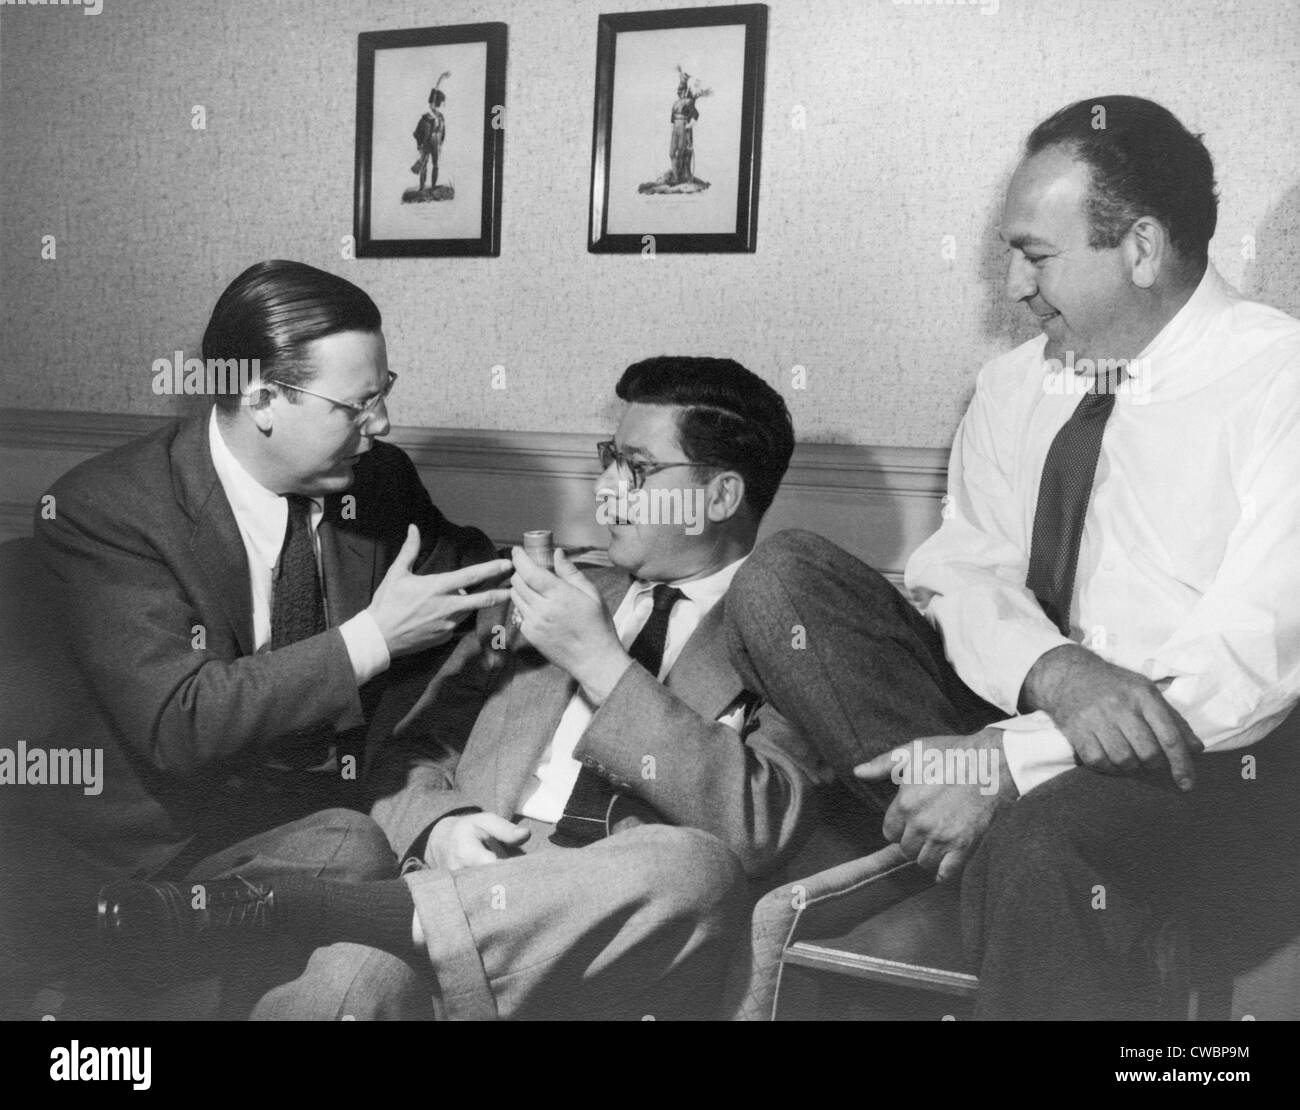 At RKO pictures, Mark Robson, Robert Wise, and producer, Val Lewton meet during the making of the horror film classic, CAT Stock Photo